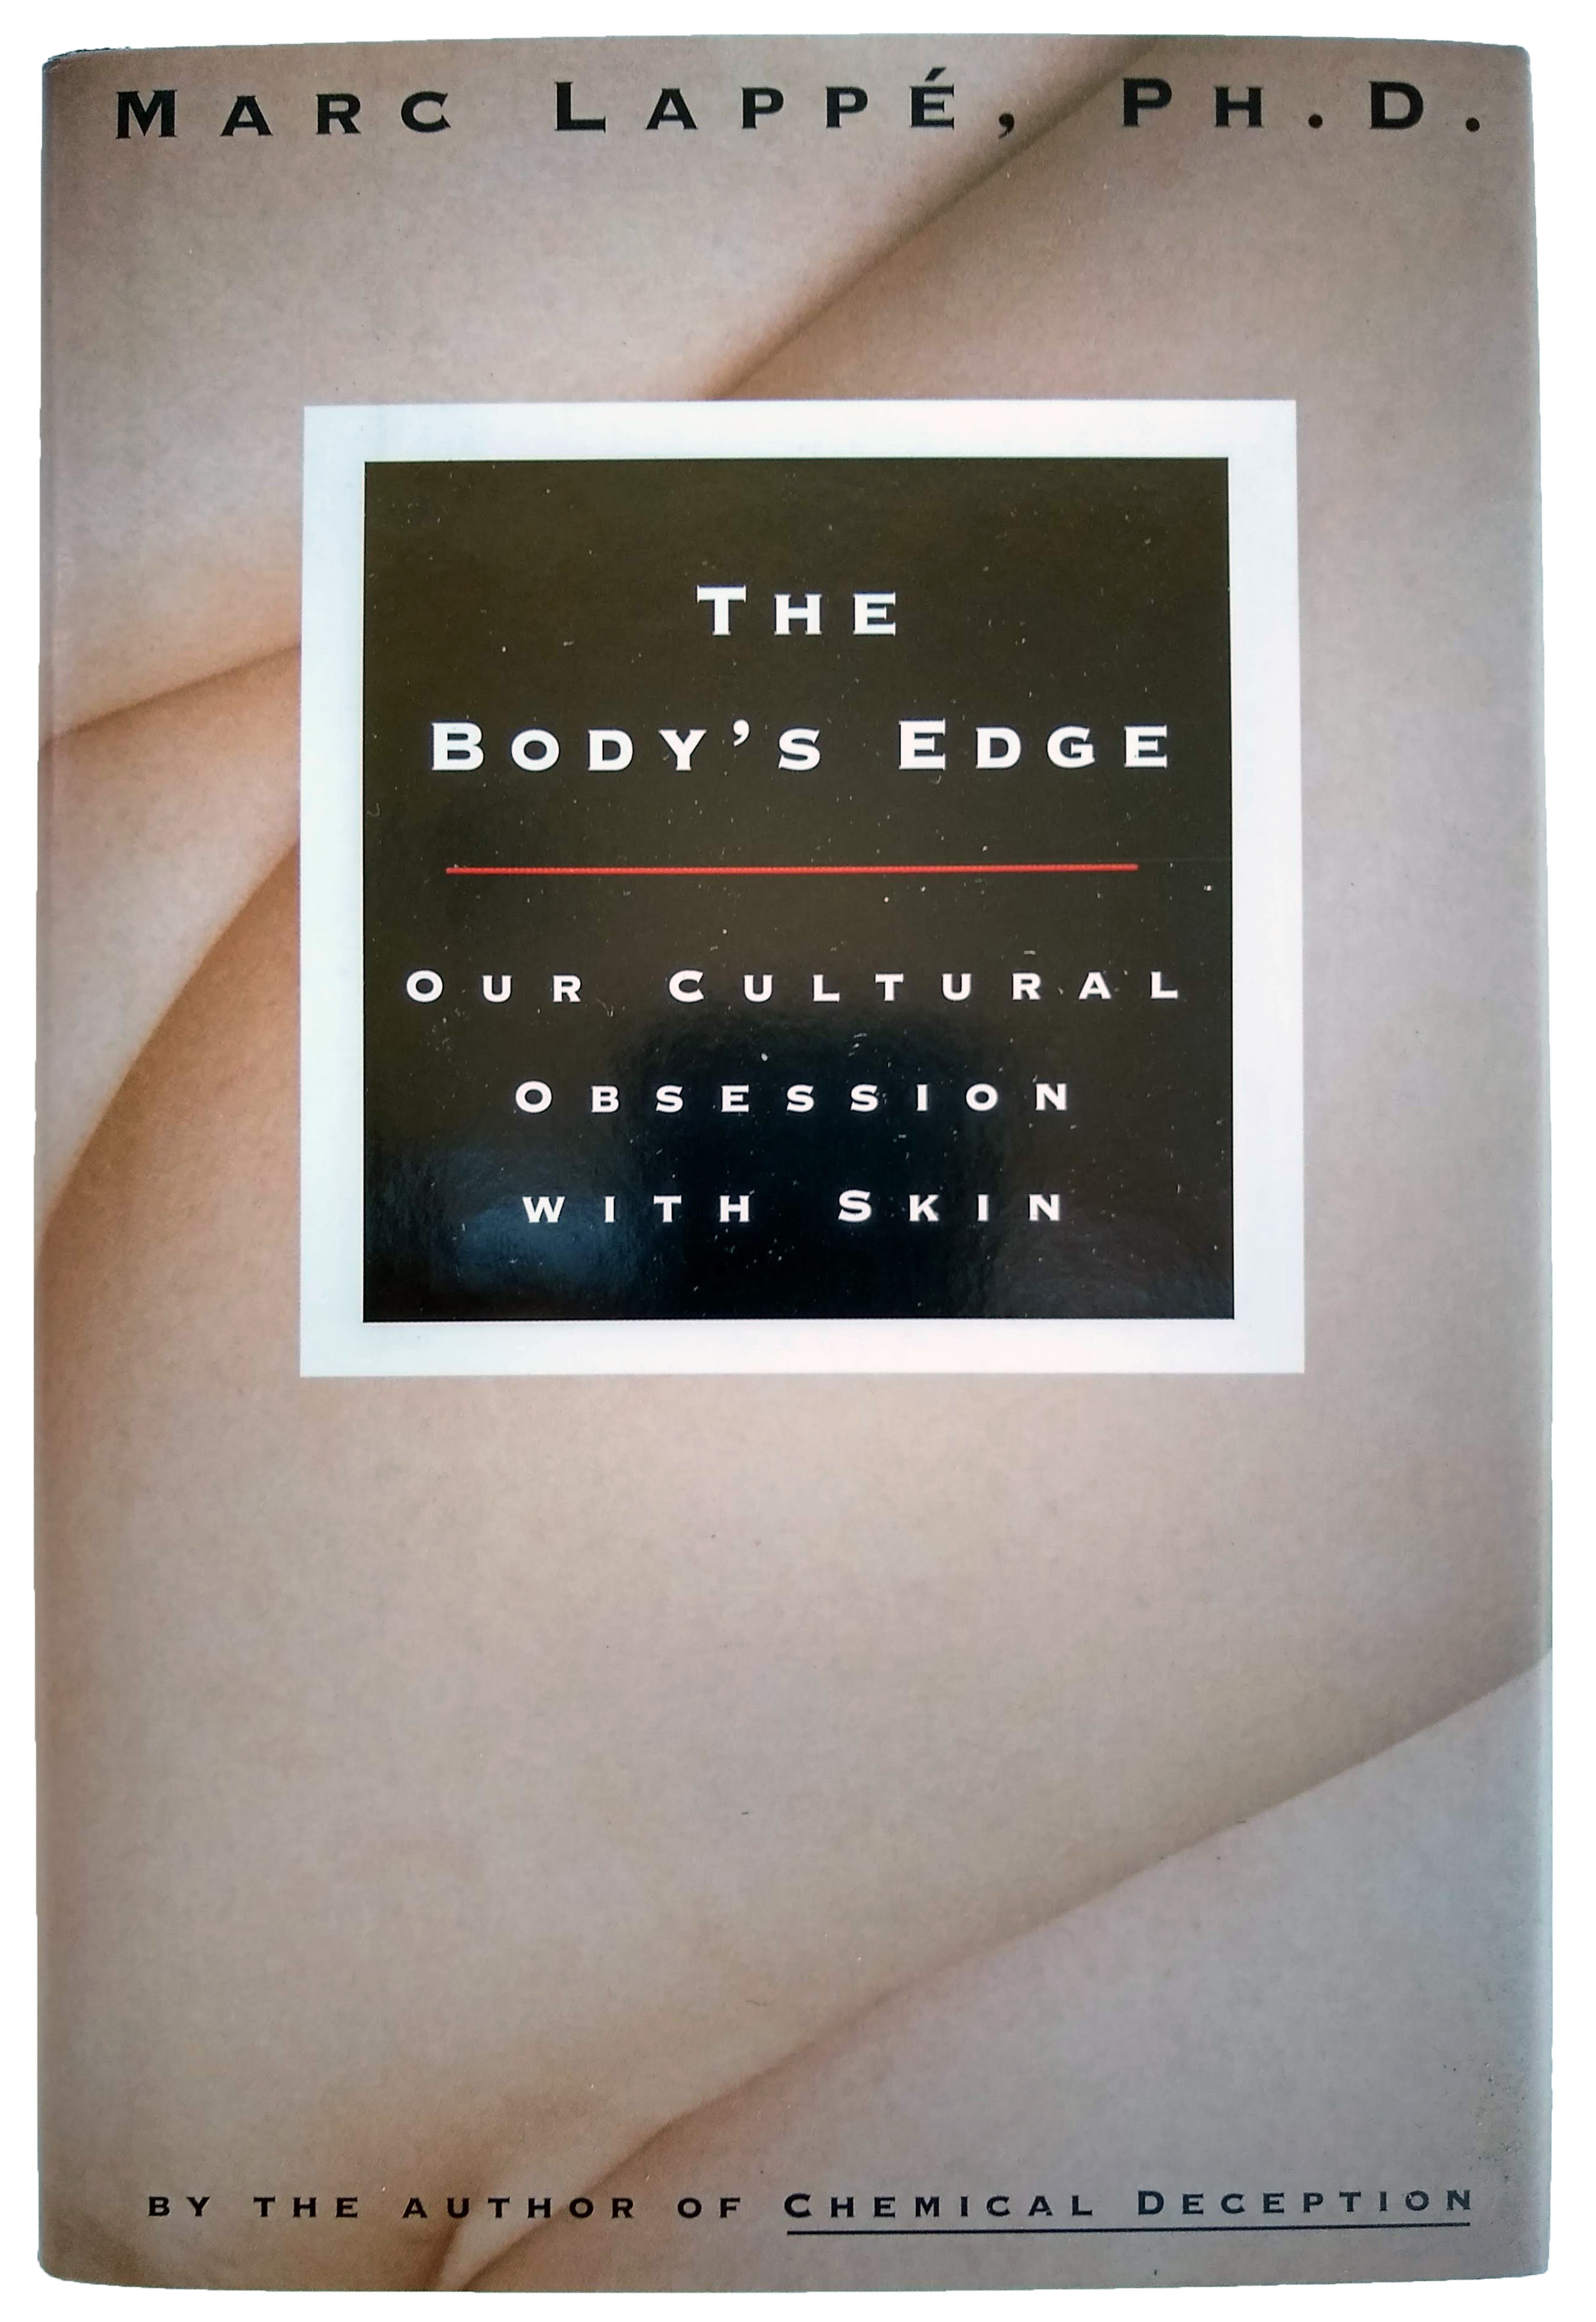 The Body's Edge: Our Cultural Obsession with Skin. - LAPPE, Marc (1943-2005).